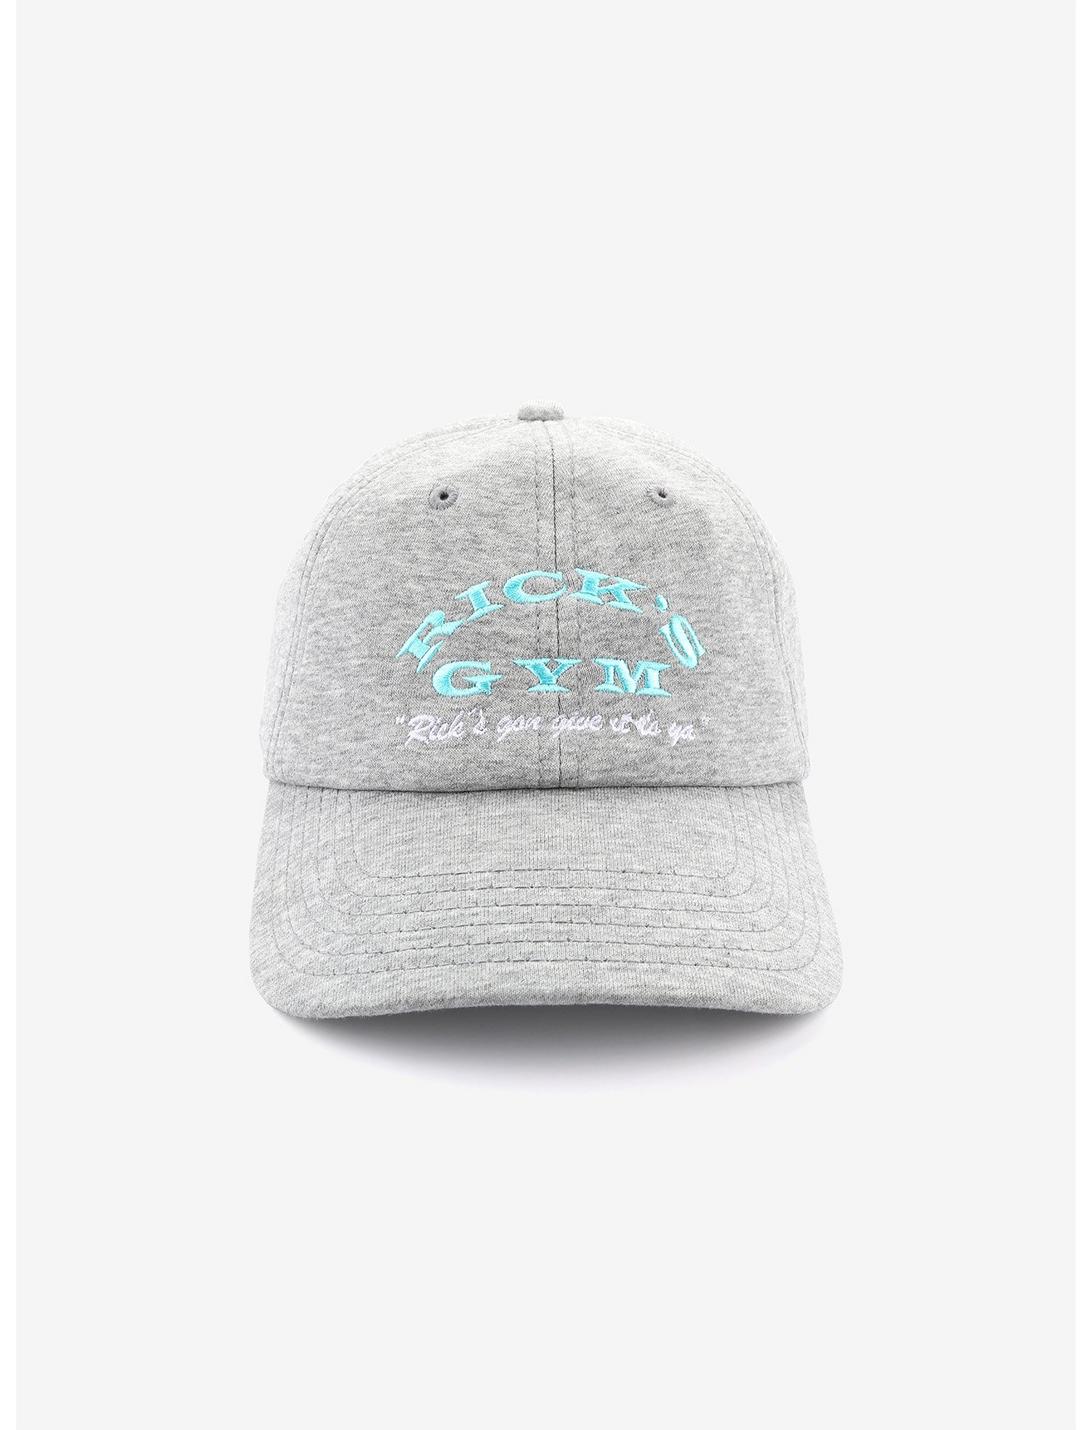 Rick And Morty Rick's Gym Dad Hat - BoxLunch Exclusive, , hi-res